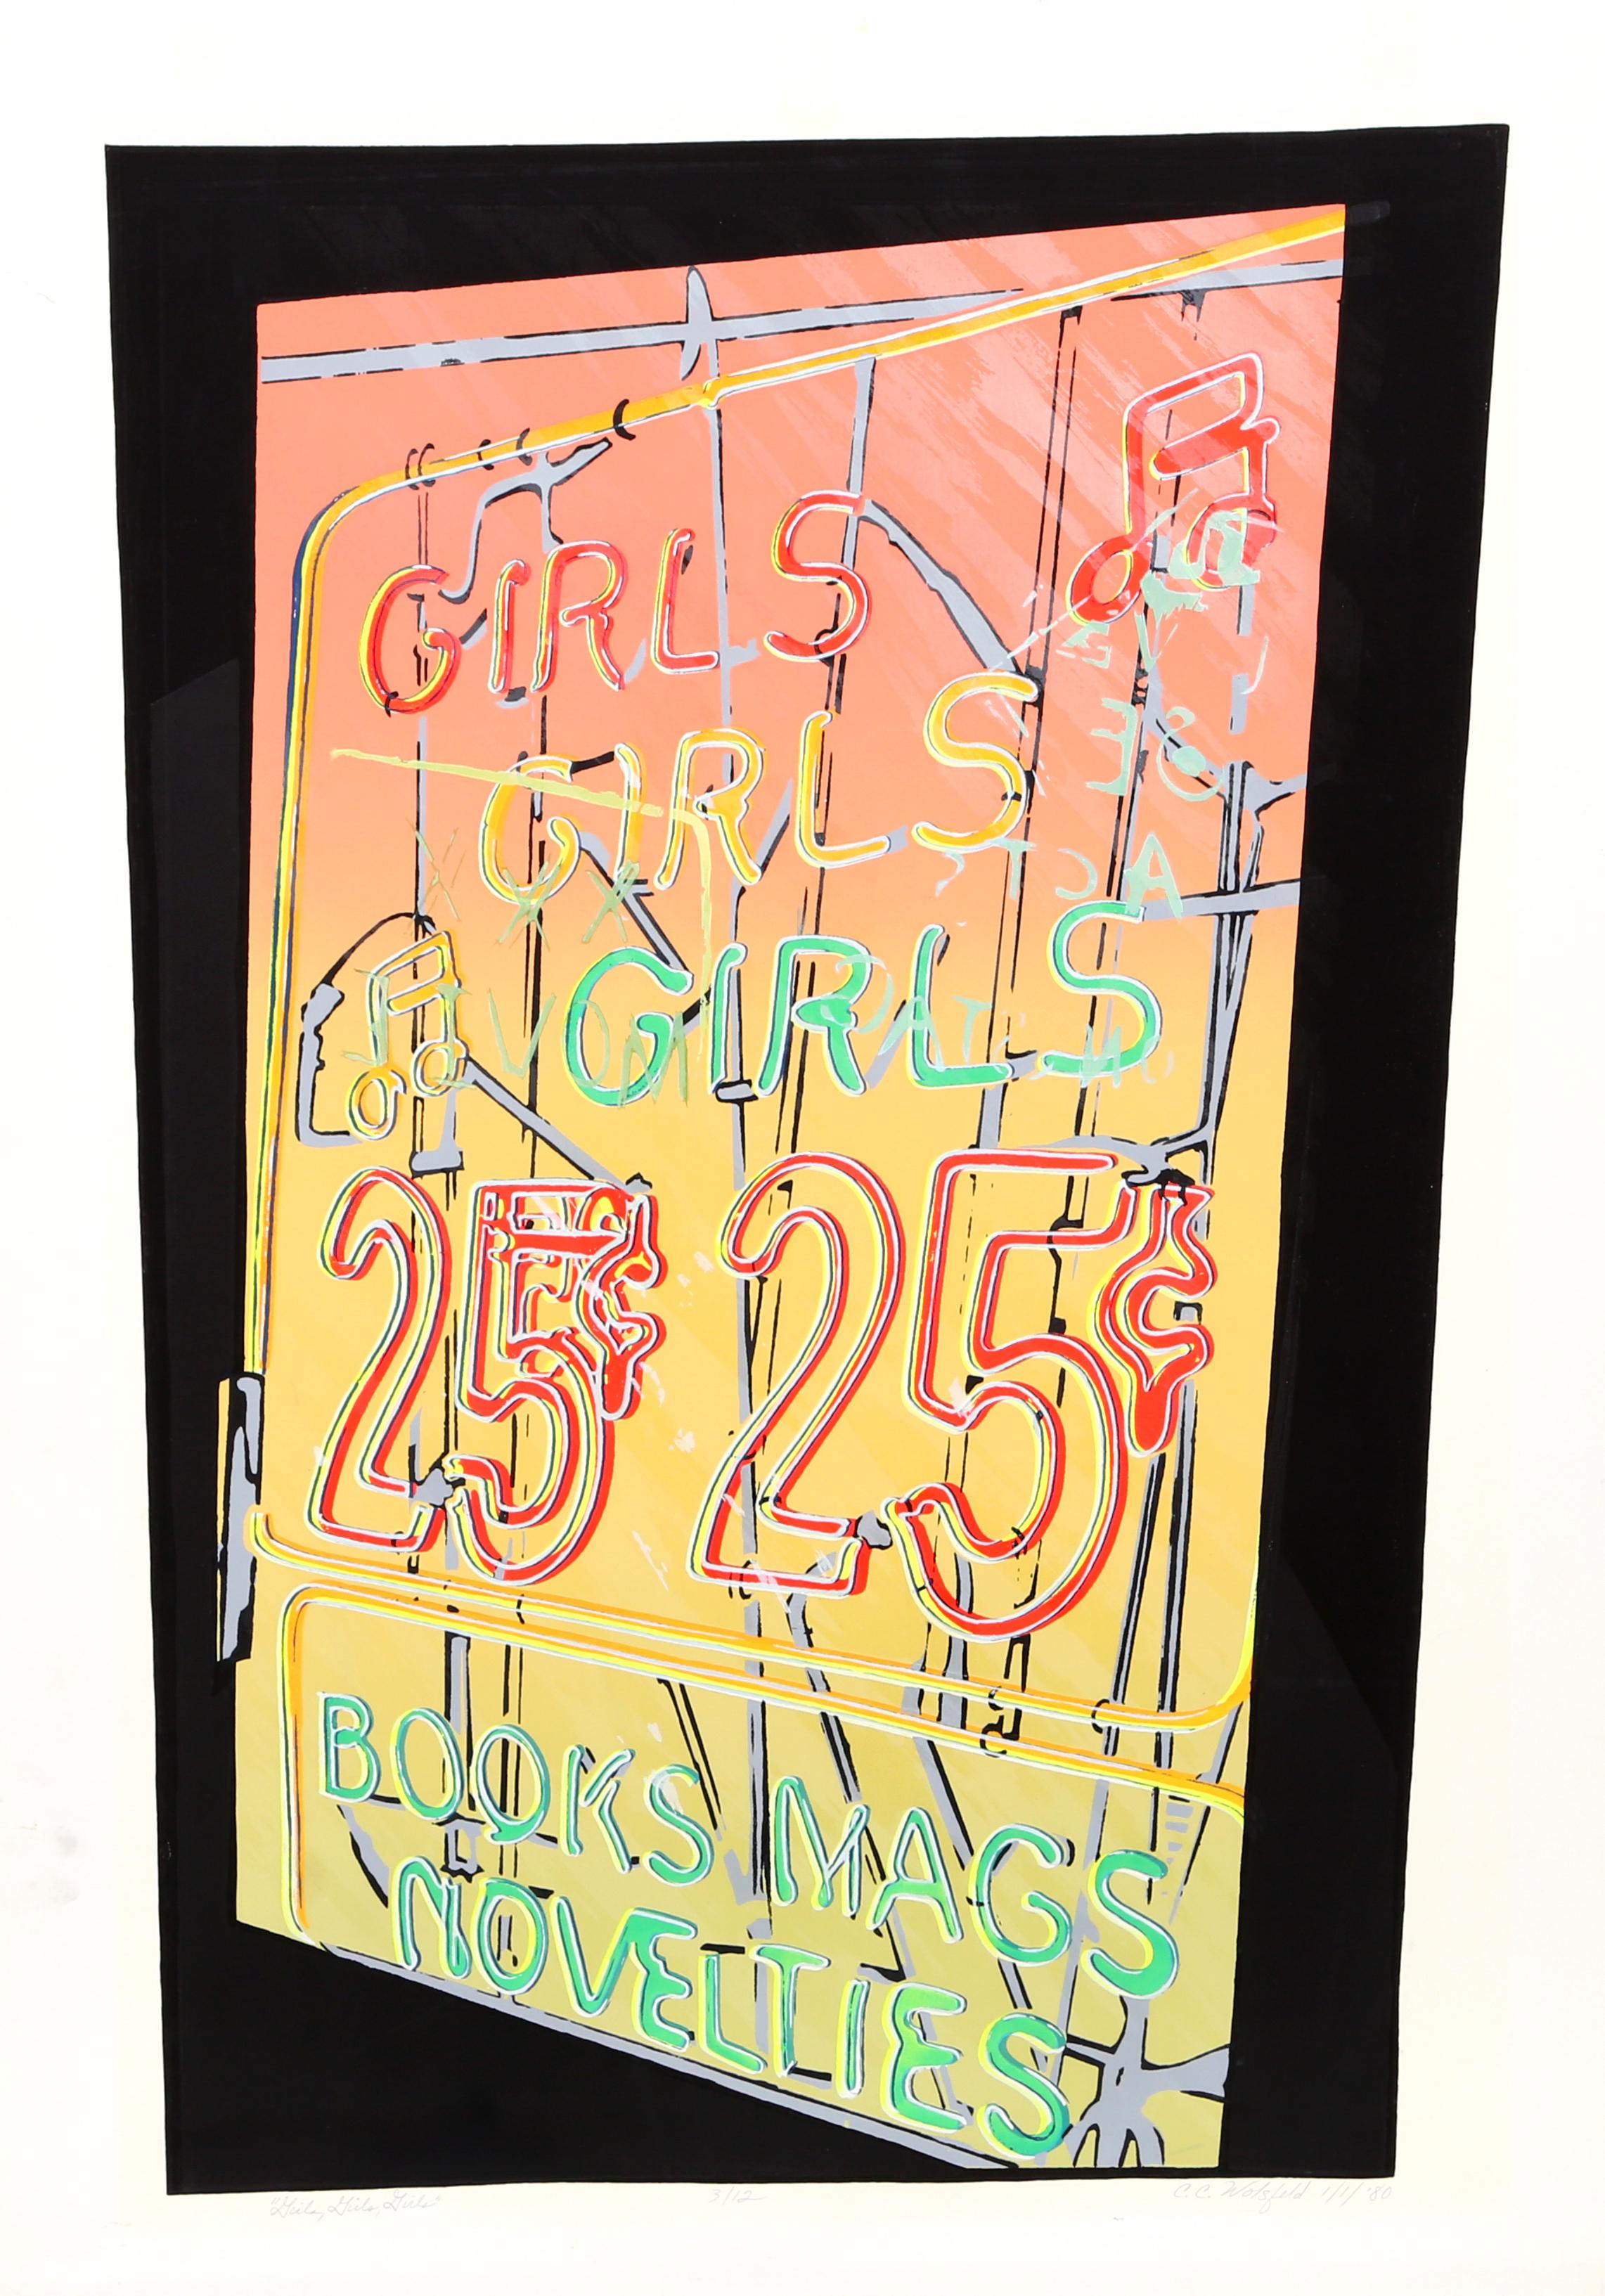 Artist: Cindy Wolsfeld, American (1953 - )
Title: Girls, Girls, Girls
Year: 1980
Medium: Screenprint, signed and numbered in pencil
Edition: AP 12
Image Size: 29 x 19 inches
Size: 33  x 23 in. (83.82  x 58.42 cm)